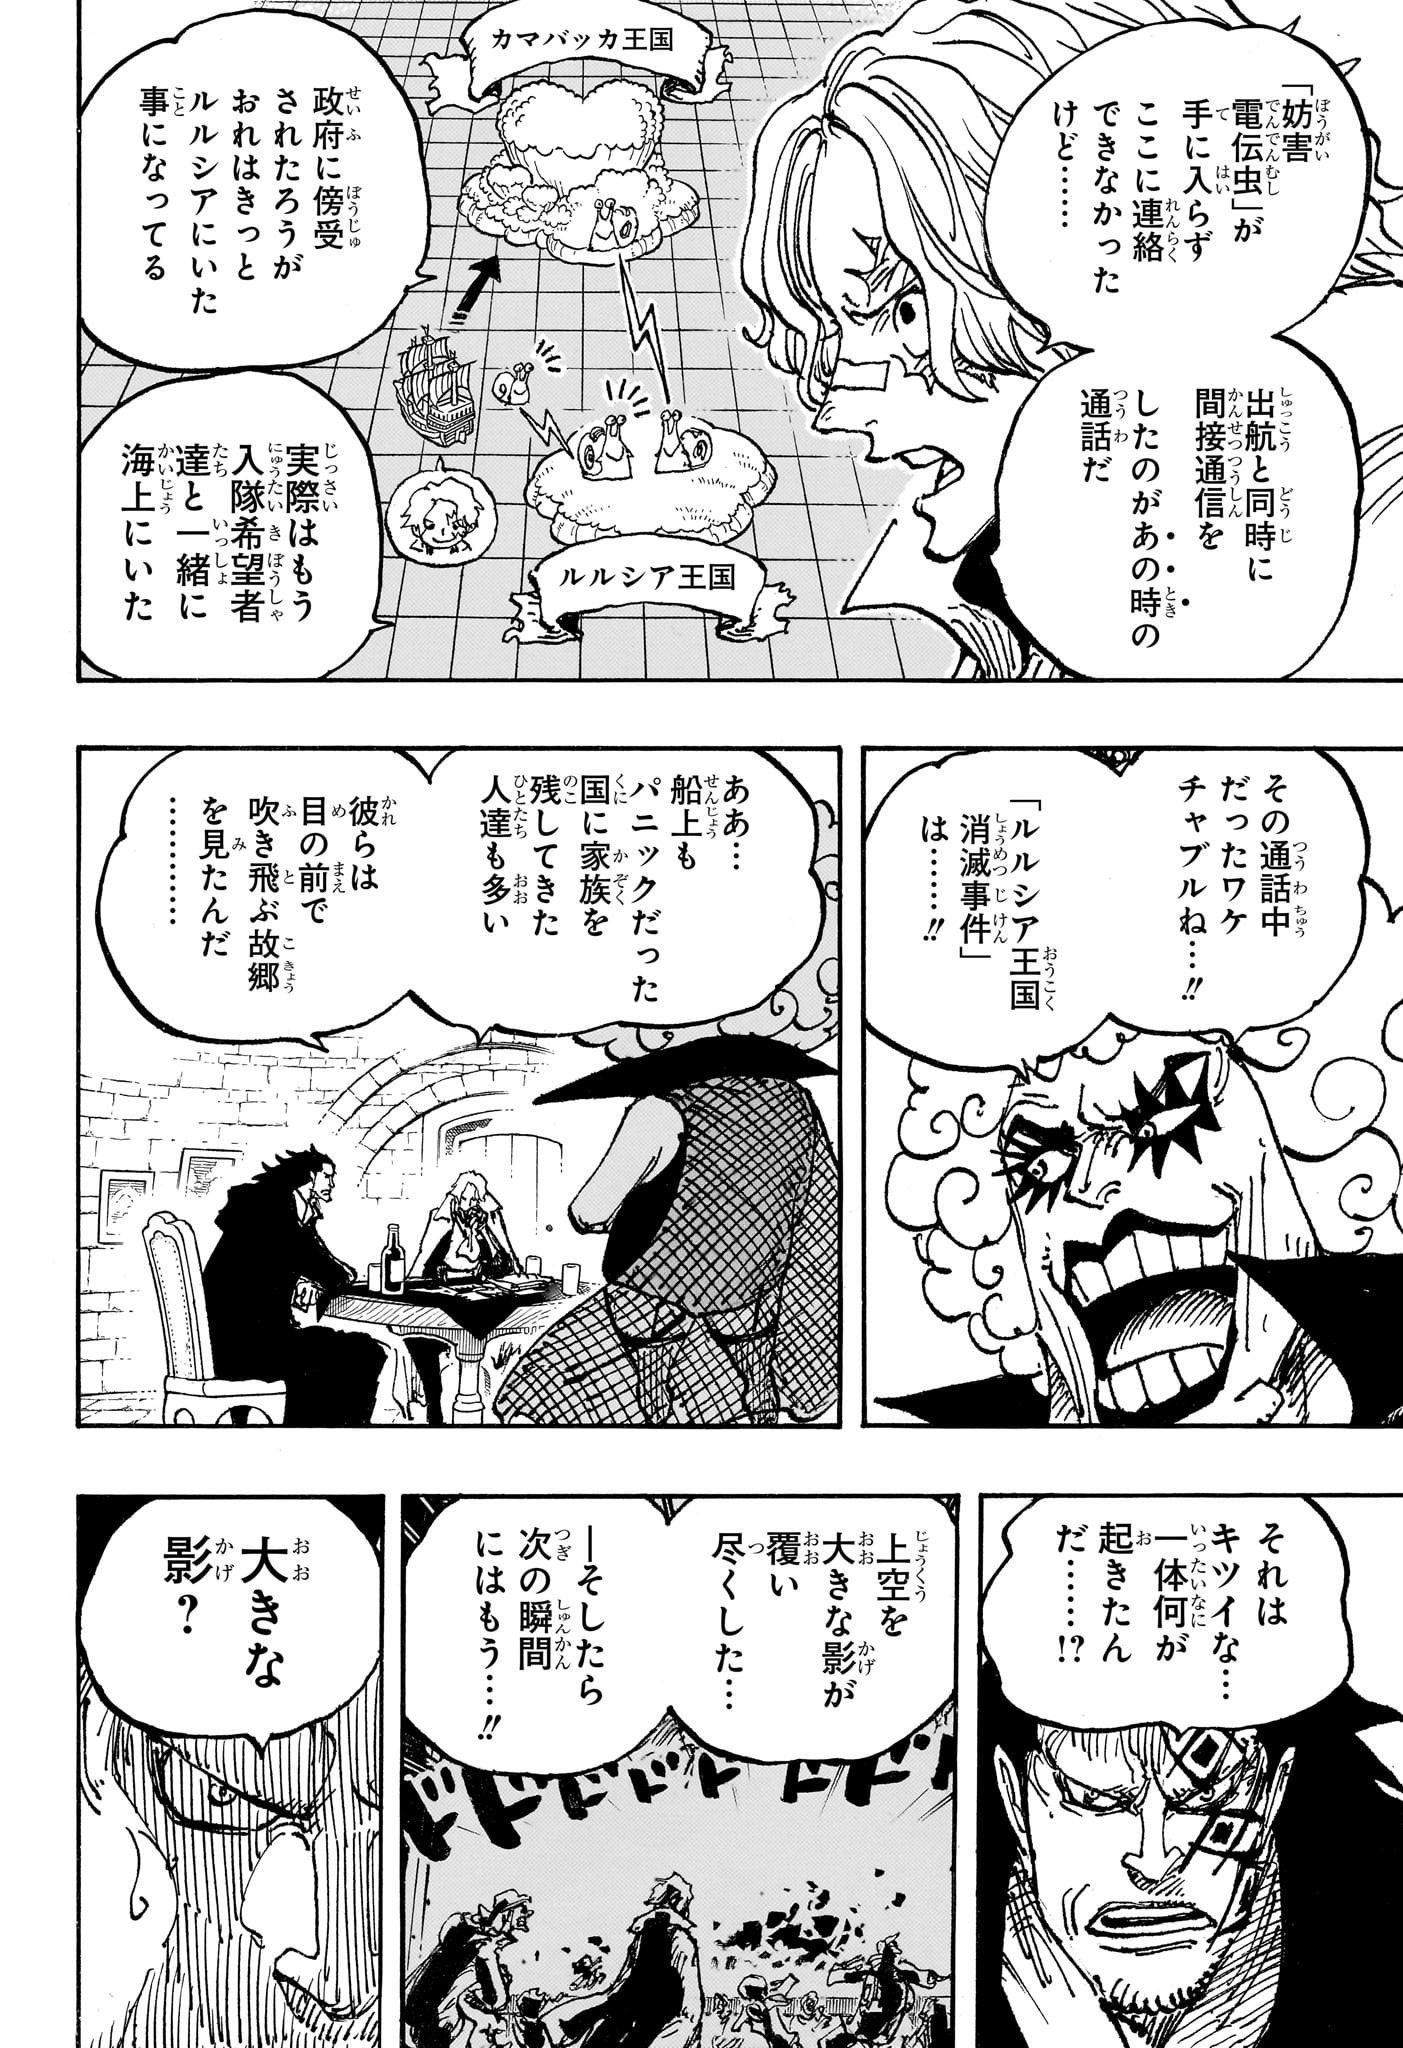 One Piece - Chapter 1086 - Page 12